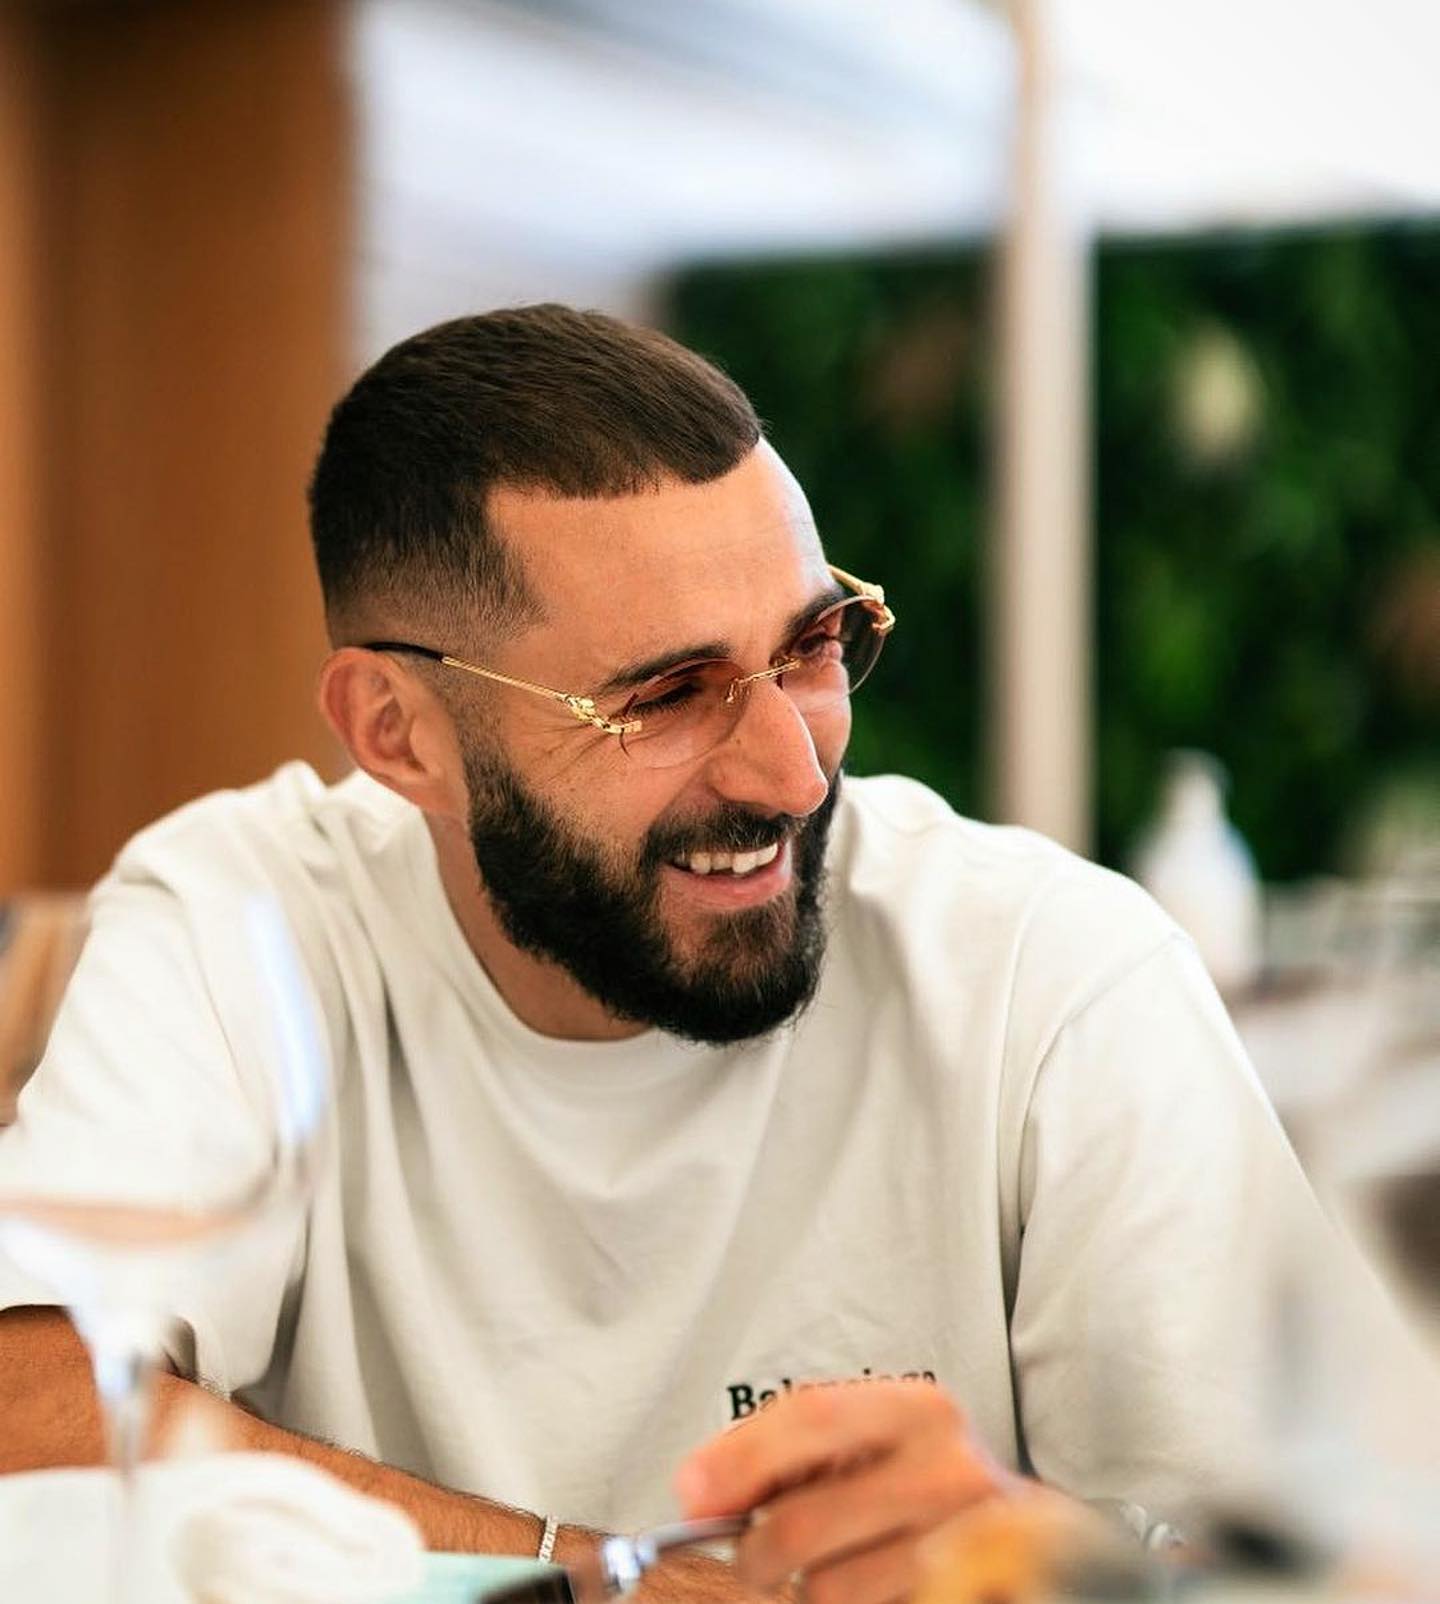 Get your hands on the trendiest eyewear of the season now! 🕶️✨ Modeled by the one and only Karim Benzema! ❤️ #cartiereyewear #karimbenzema #styleicon #sunglasses #luxuryfashion #summervibes #musthaveaccessories #cartierdealer